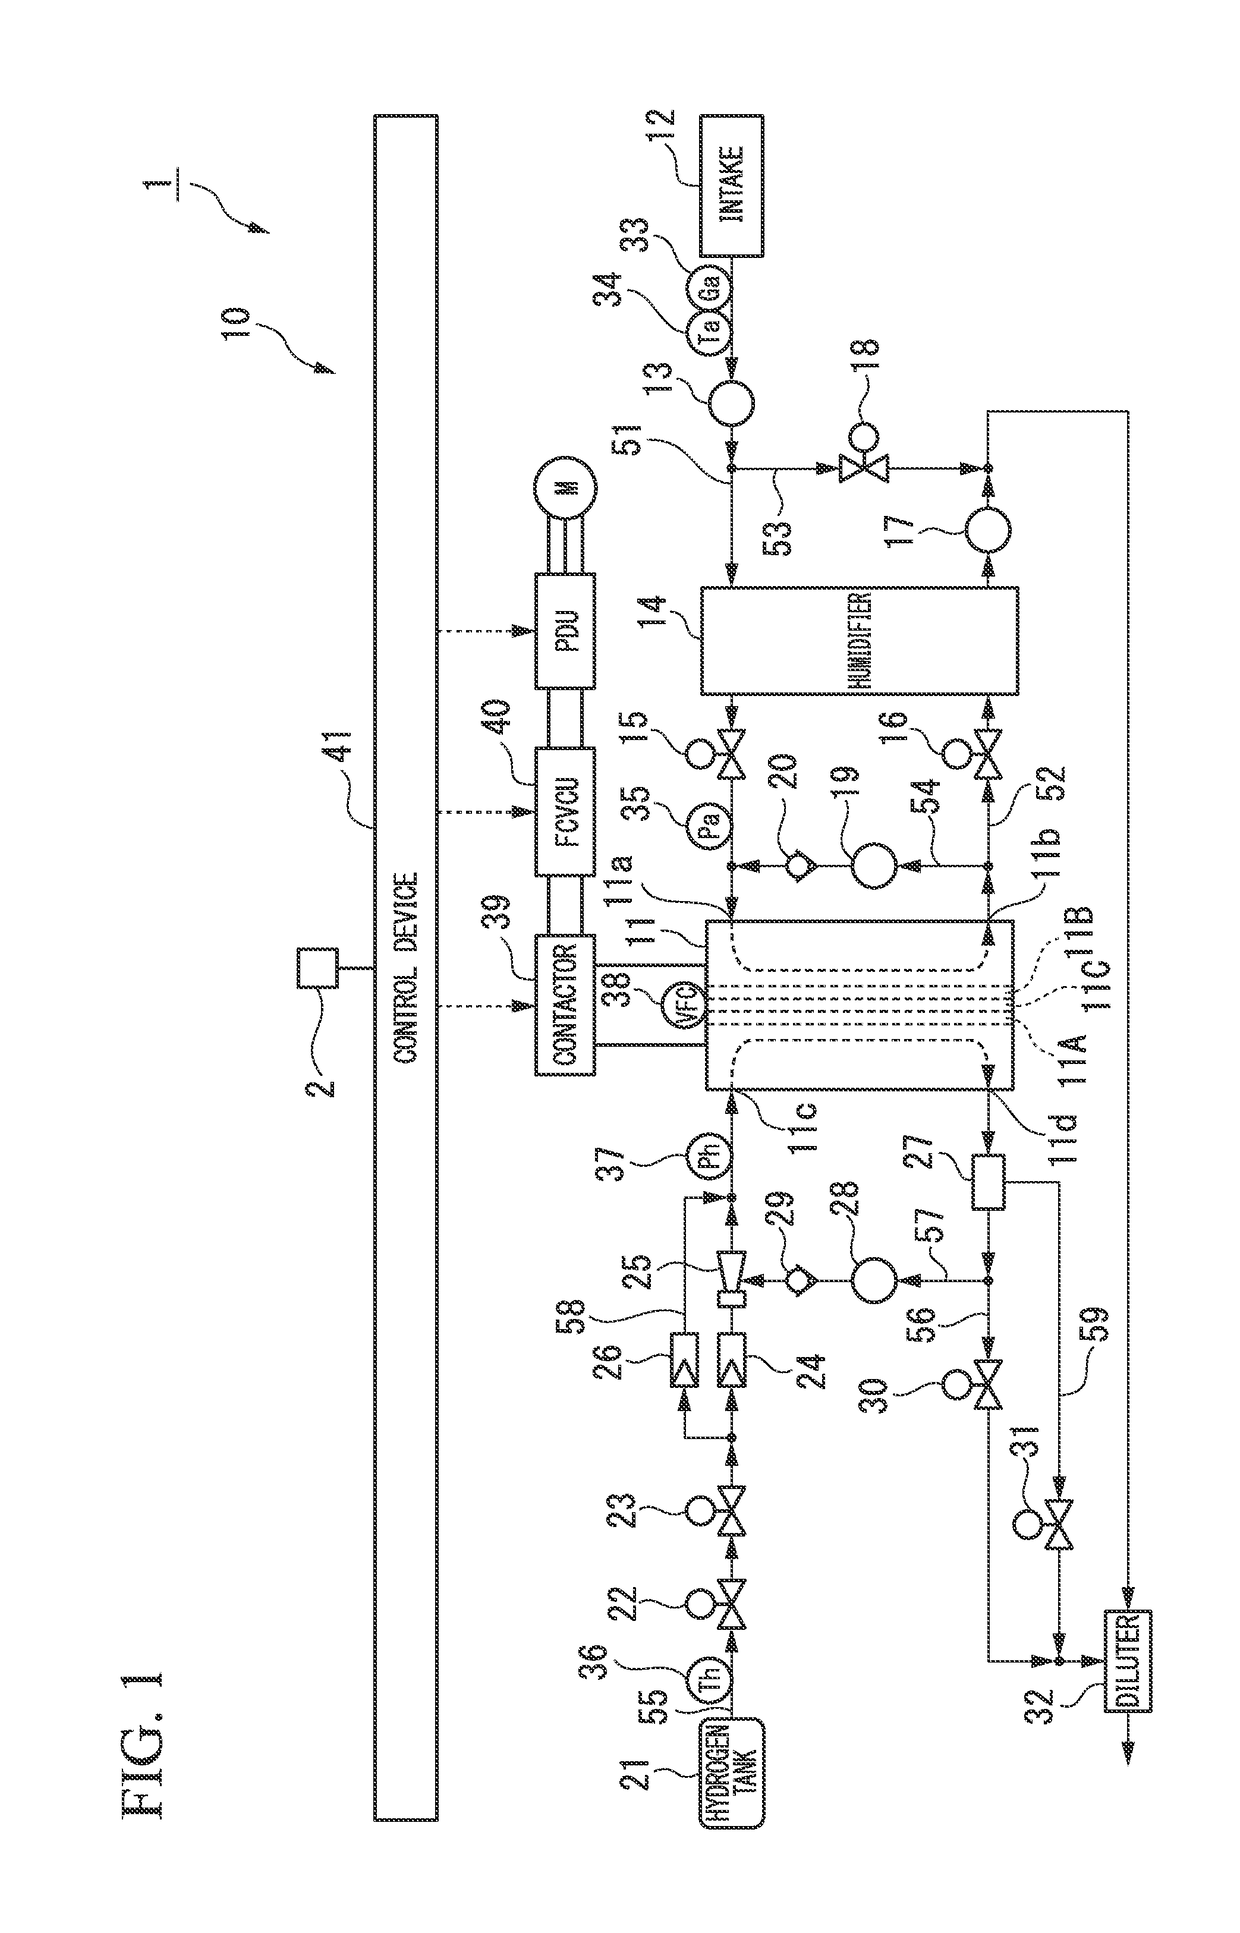 Method of starting fuel cell system